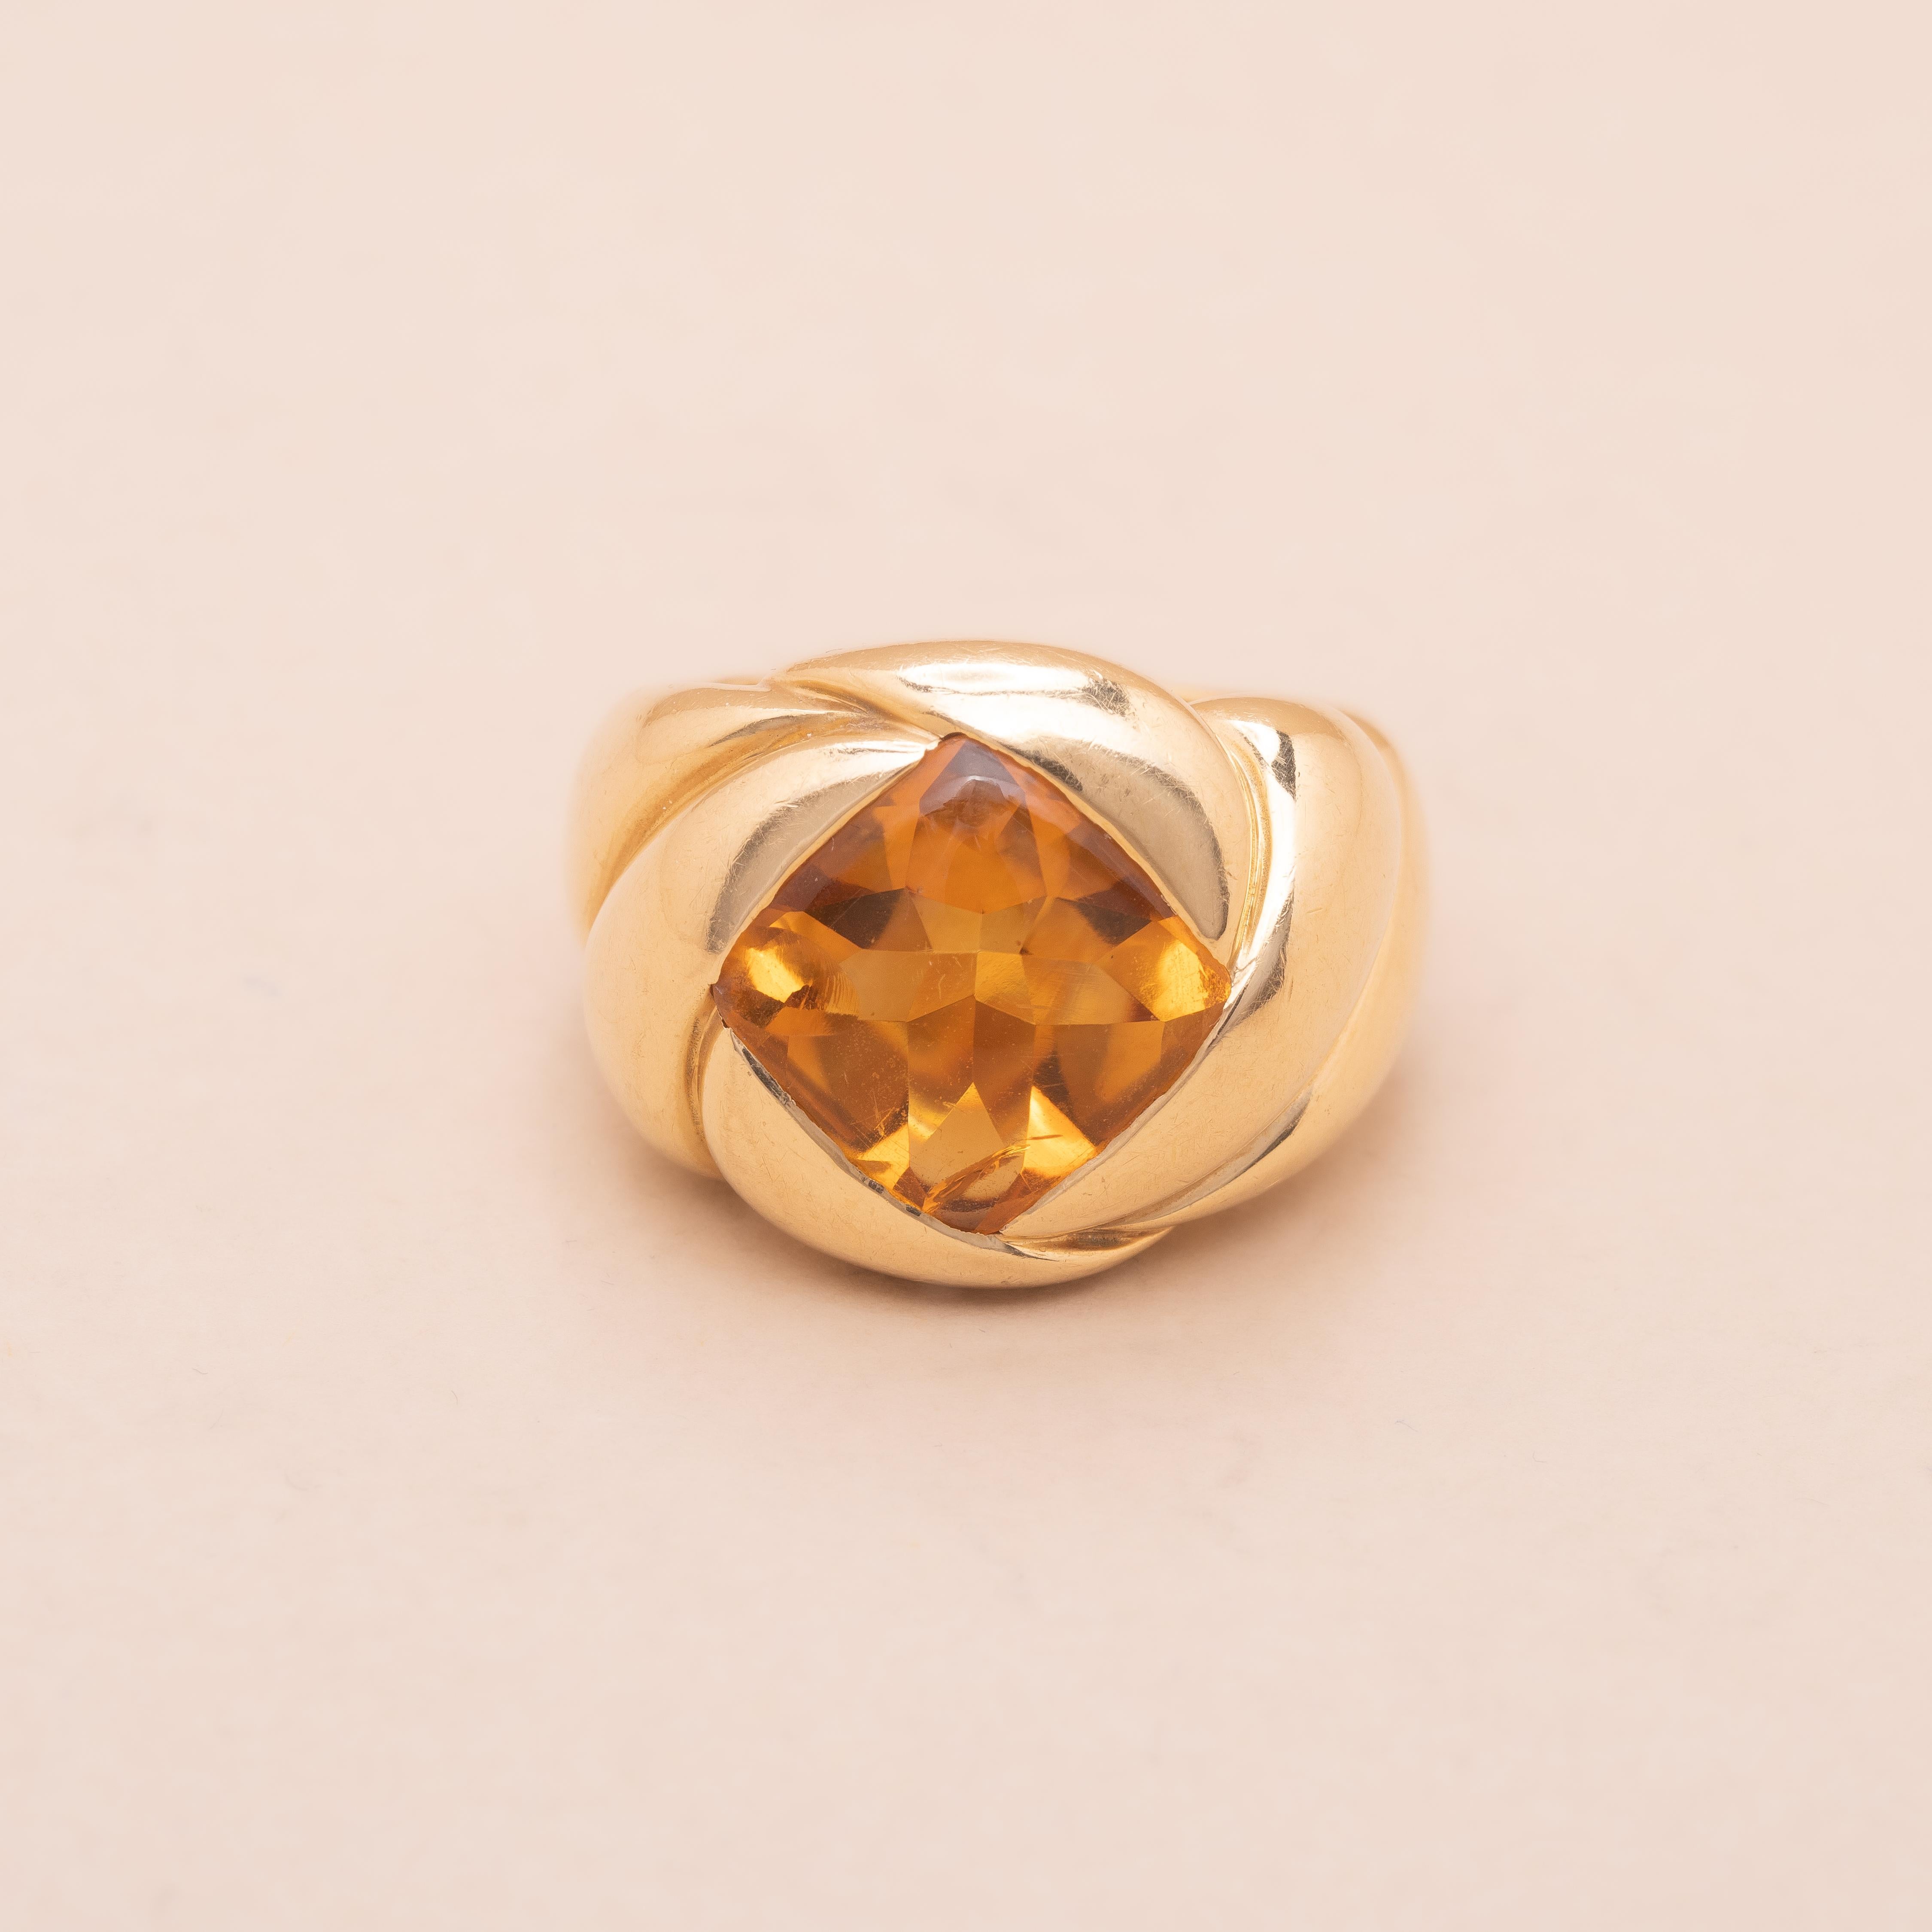 18K gold buff squared-cut citrine dome ring. 

Small wears and tears

French craftsmanship from the nineties 

Eagle's head hallmark and maker's hallmark from Lyon, France

Estimated weight of the citrine : around 6.80 carats

Width : 18.10mm

Ring